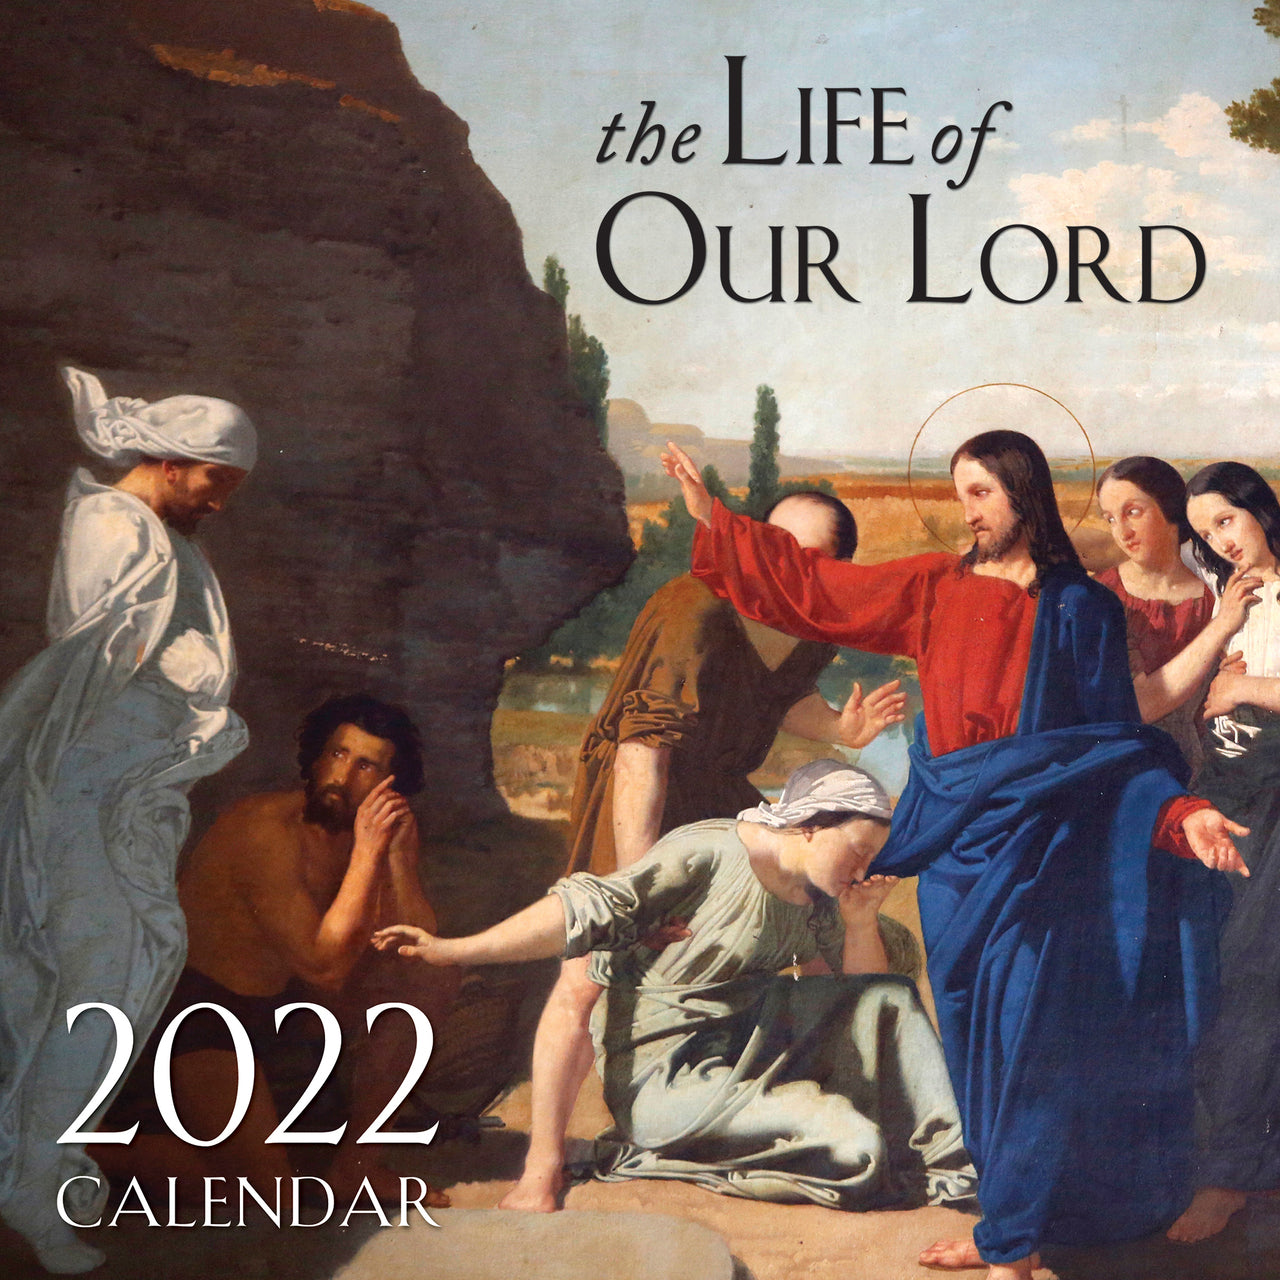 The Life of Our Lord Catholic Wall Calendar 2022